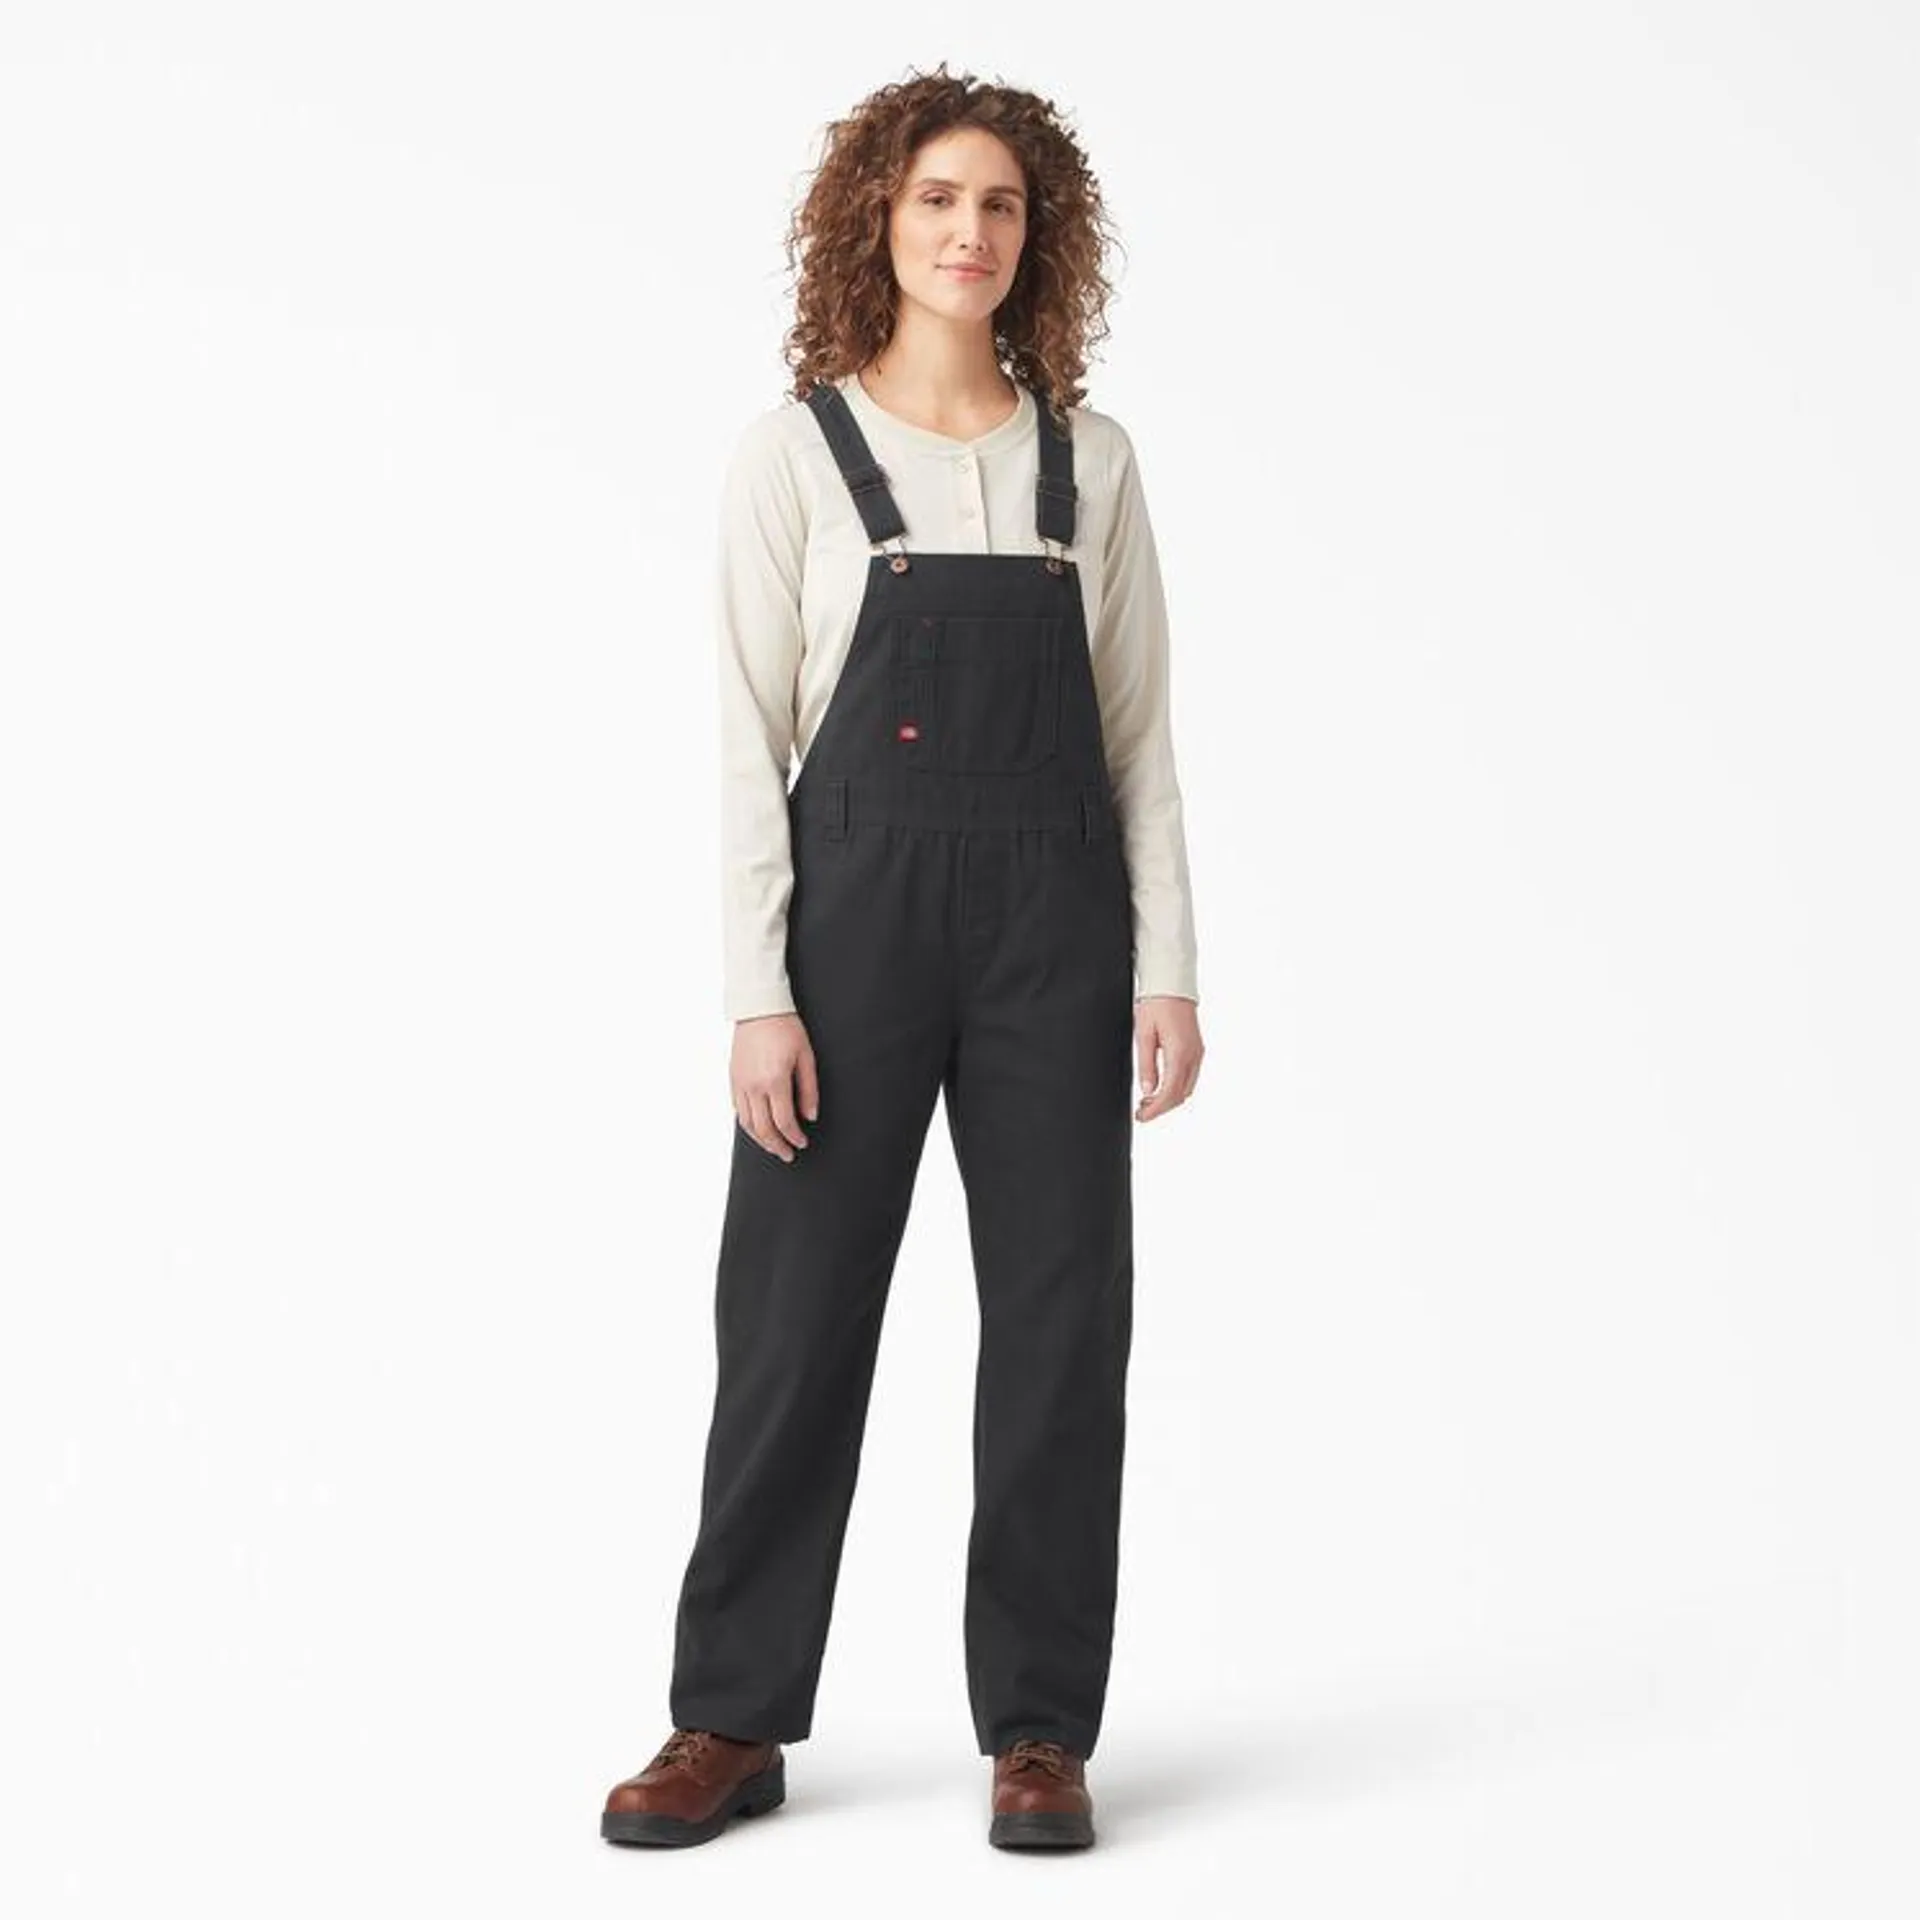 Women's Relaxed Fit Bib Overalls, Rinsed Black